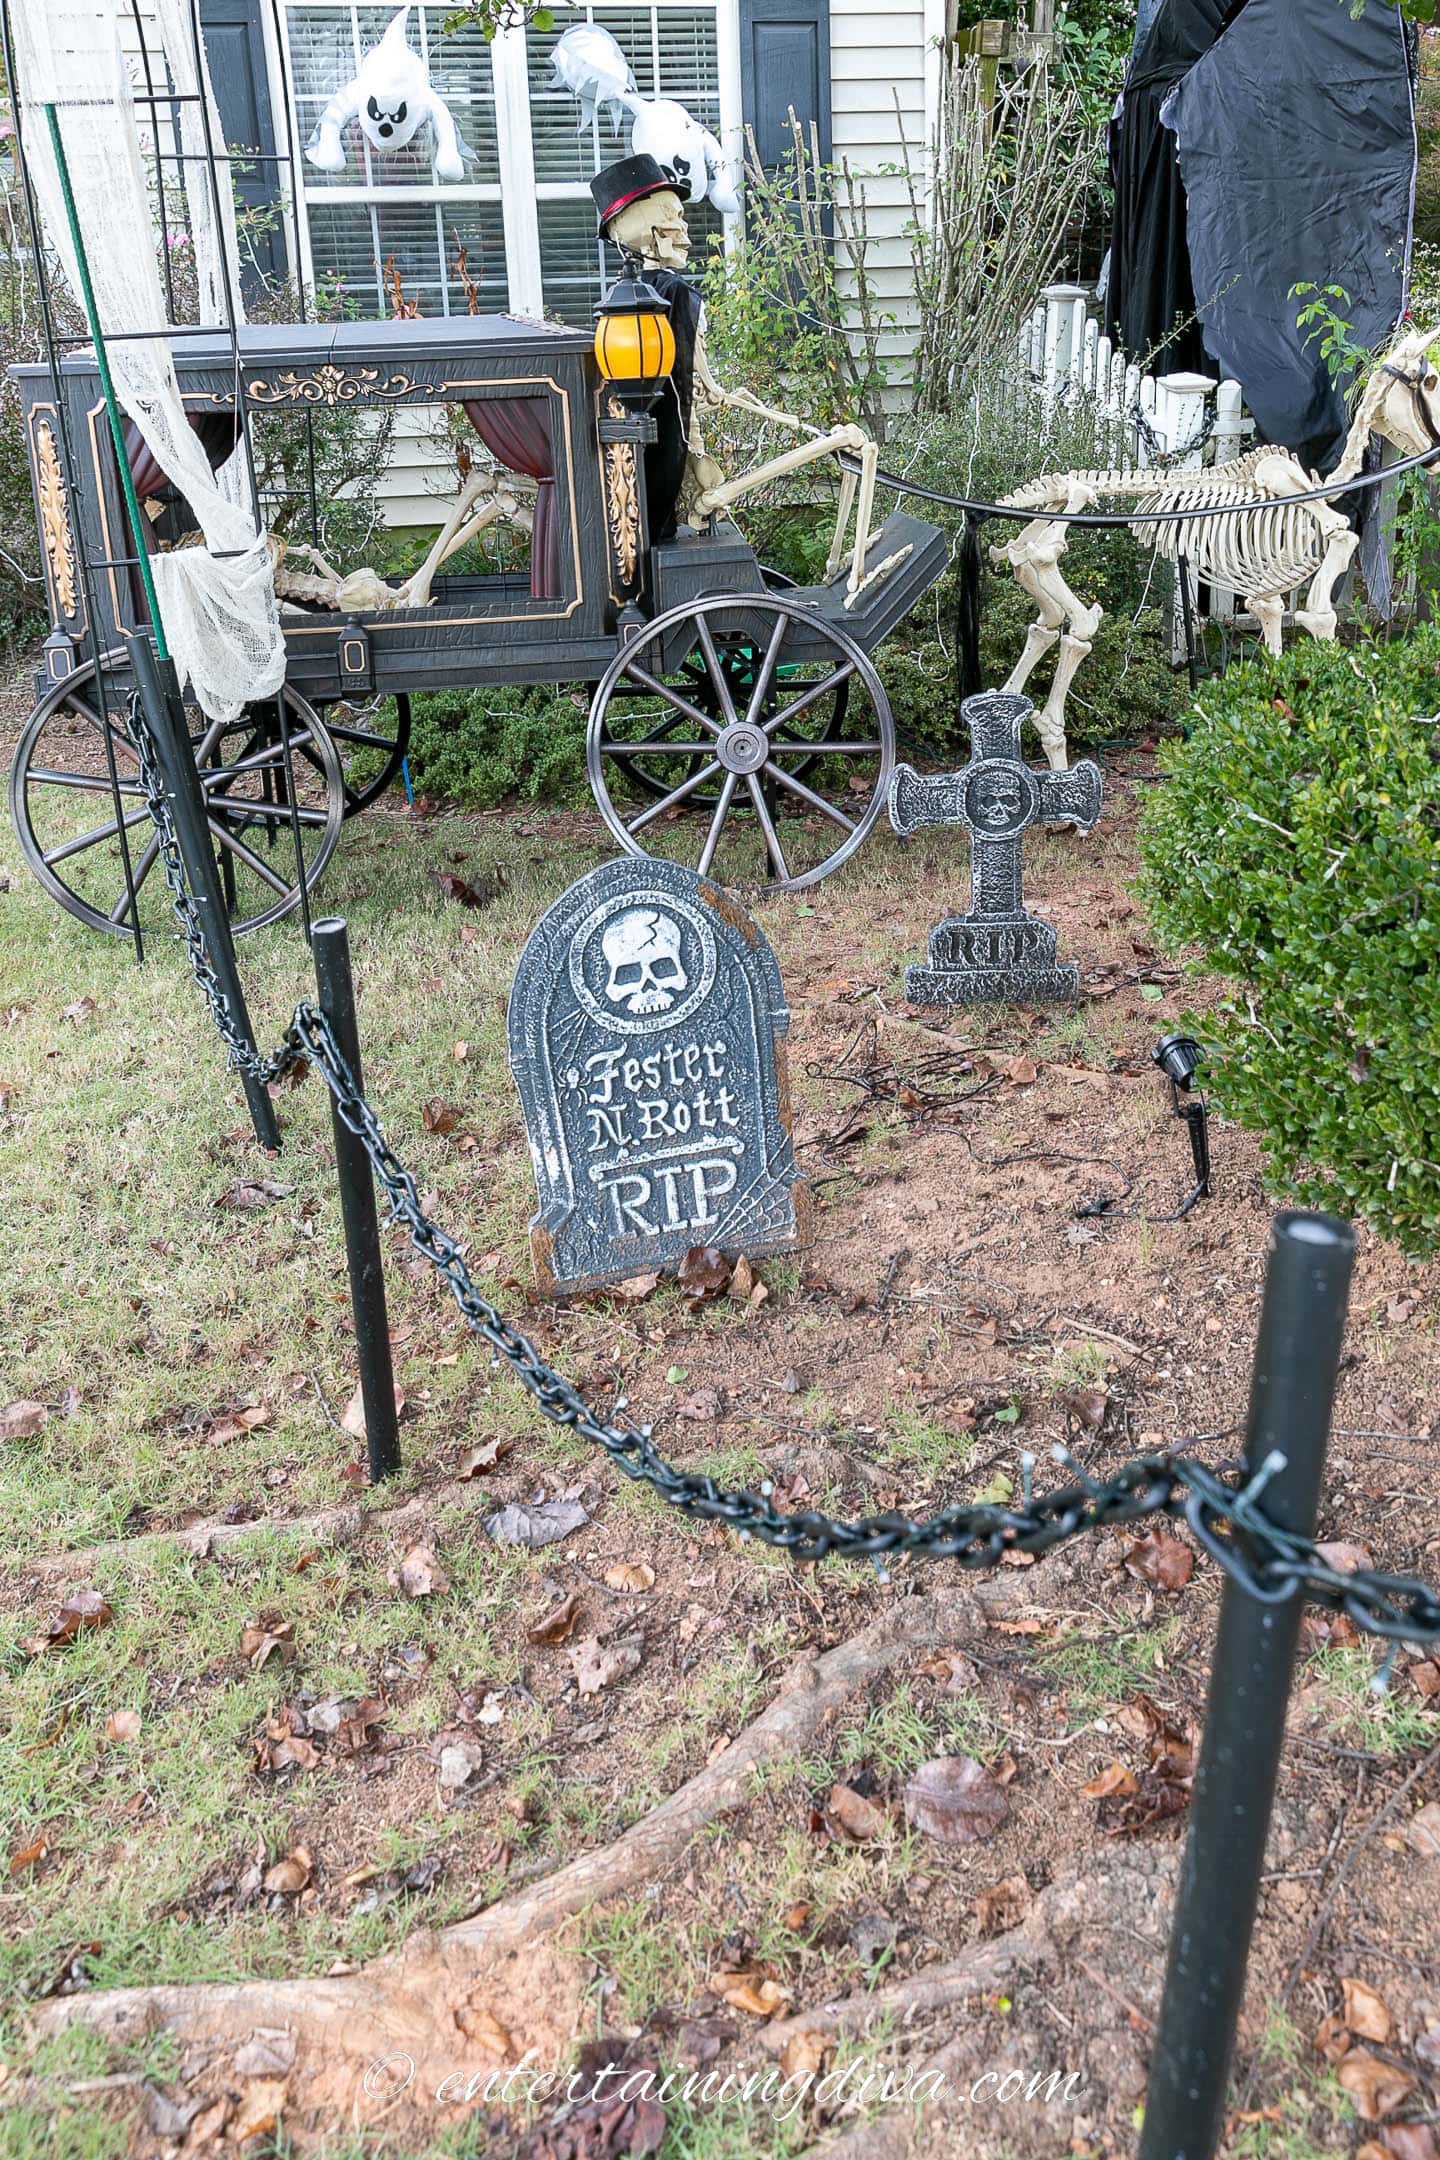 Chain fence surrounding a Halloween graveyard with tombstones and a skeleton horse and carriage